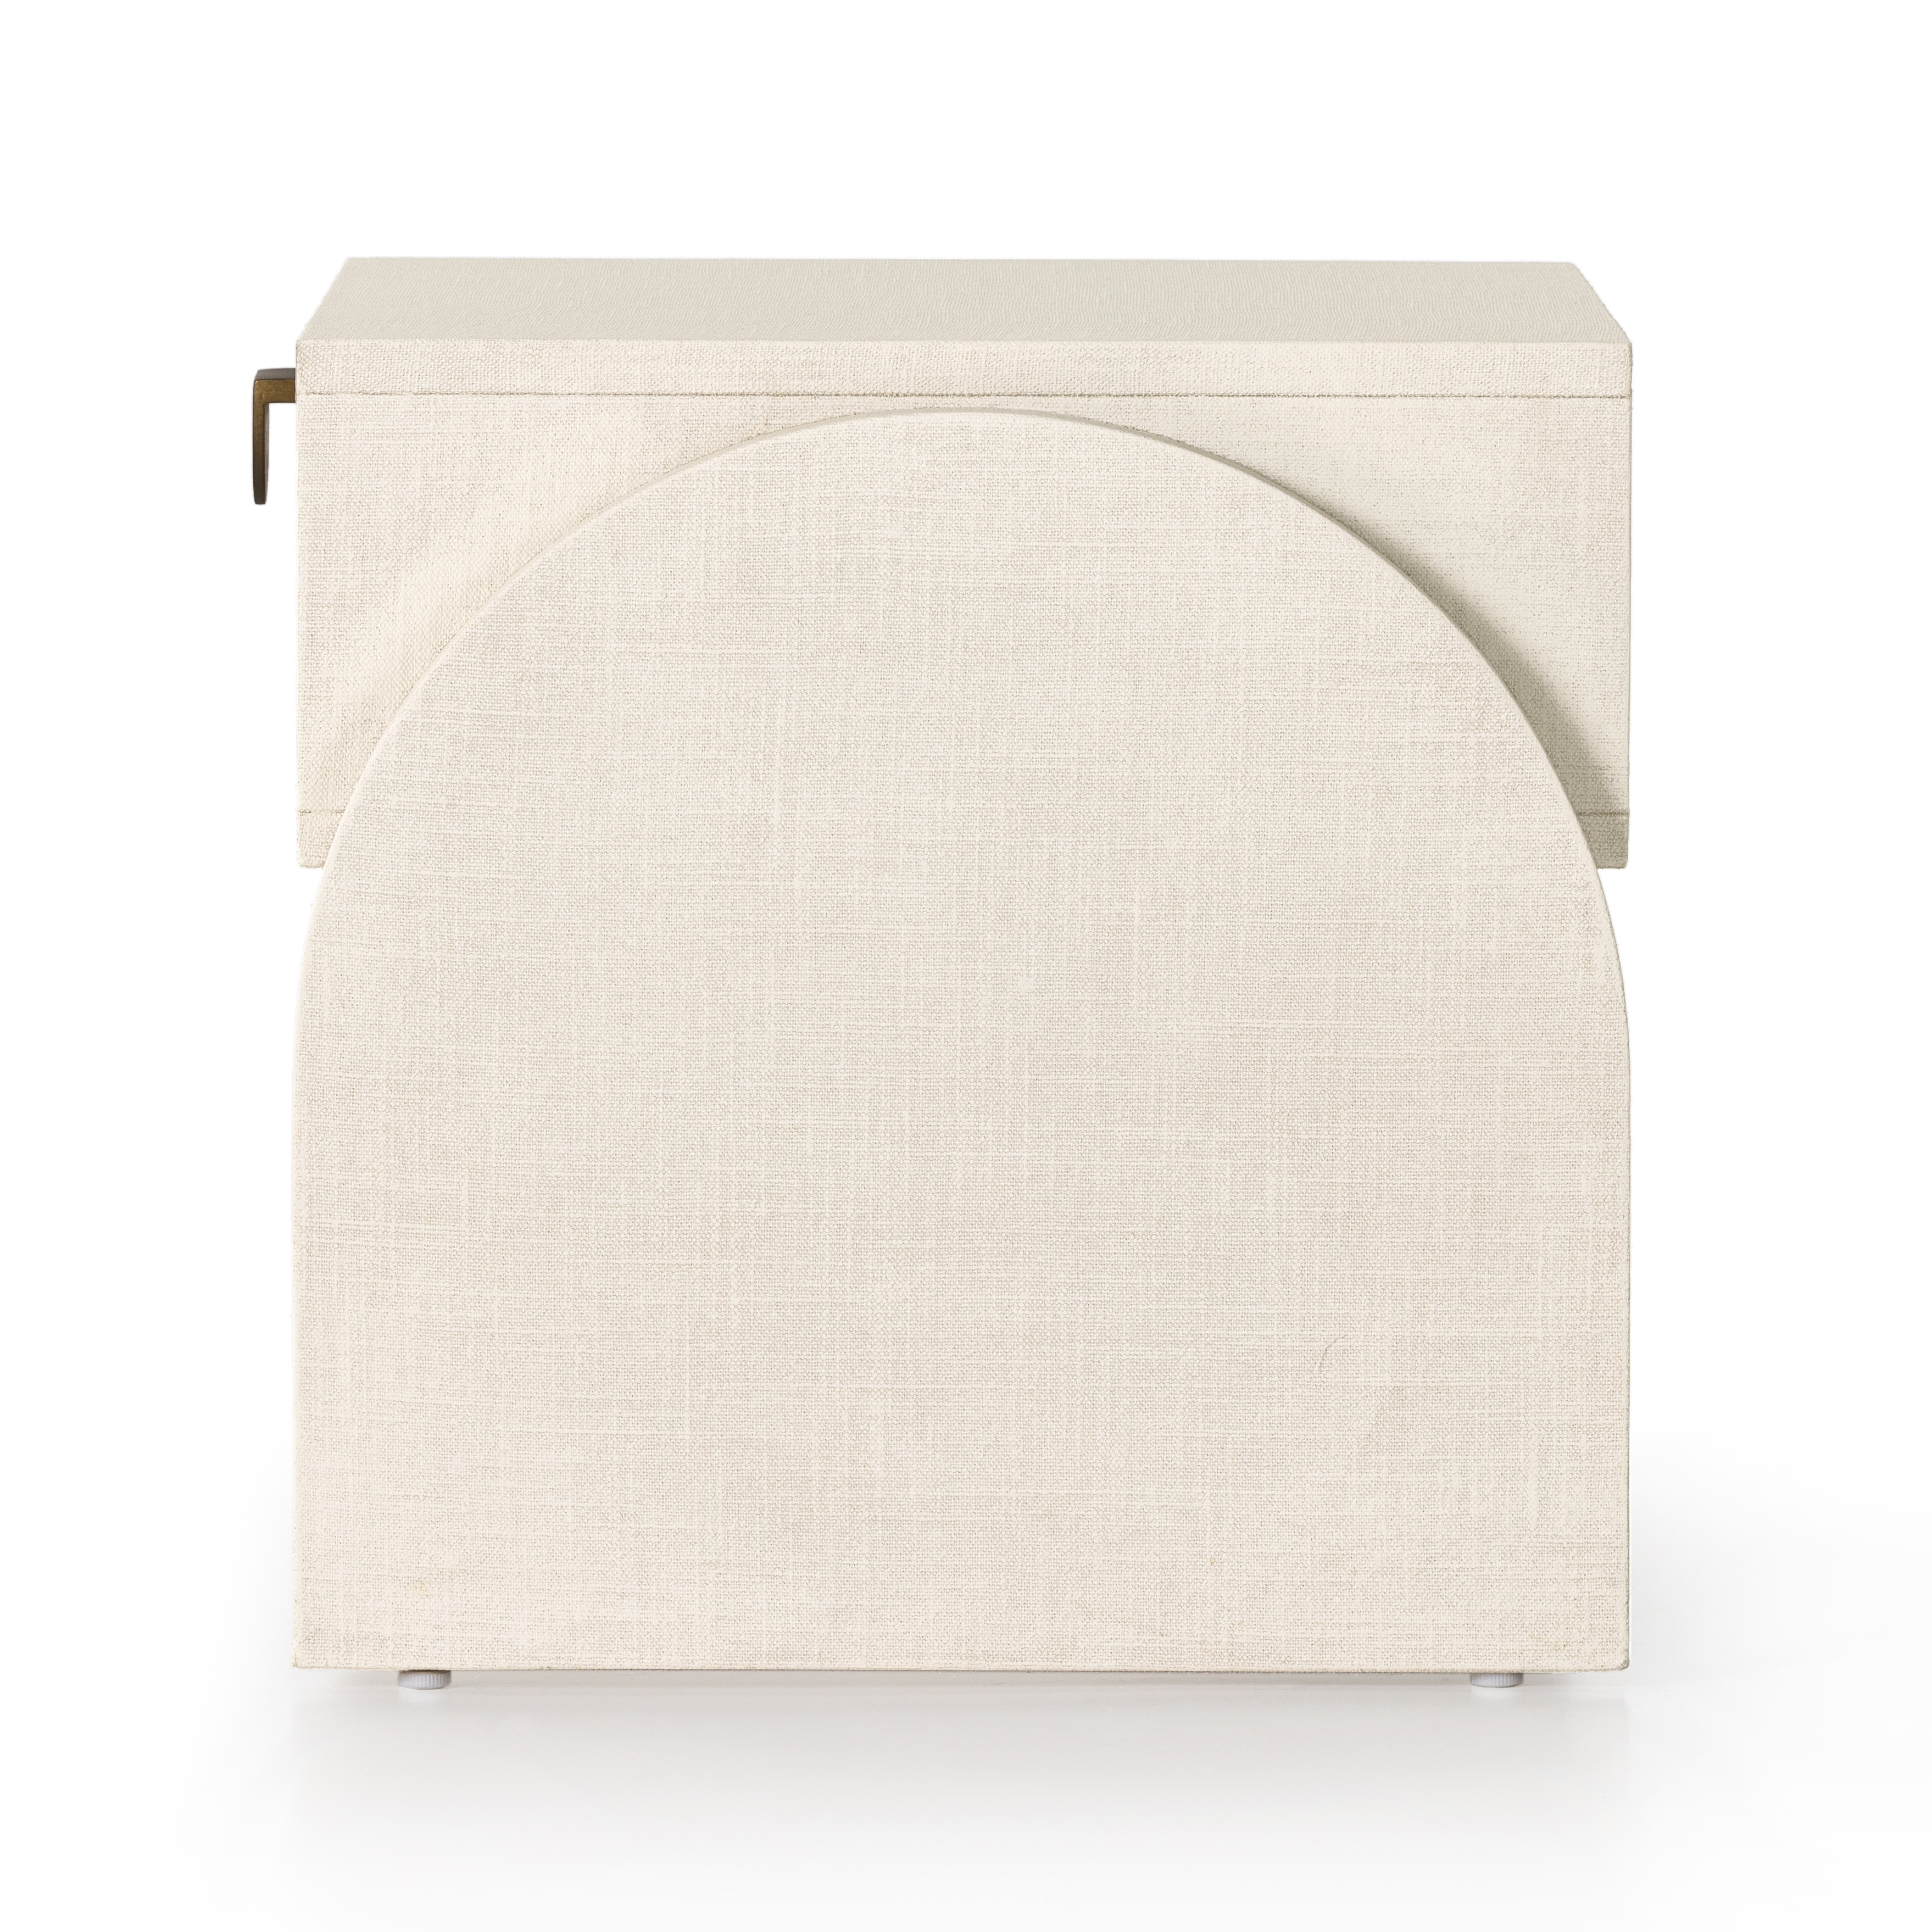 Cressida End Table-Ivory Painted Linen - Image 5